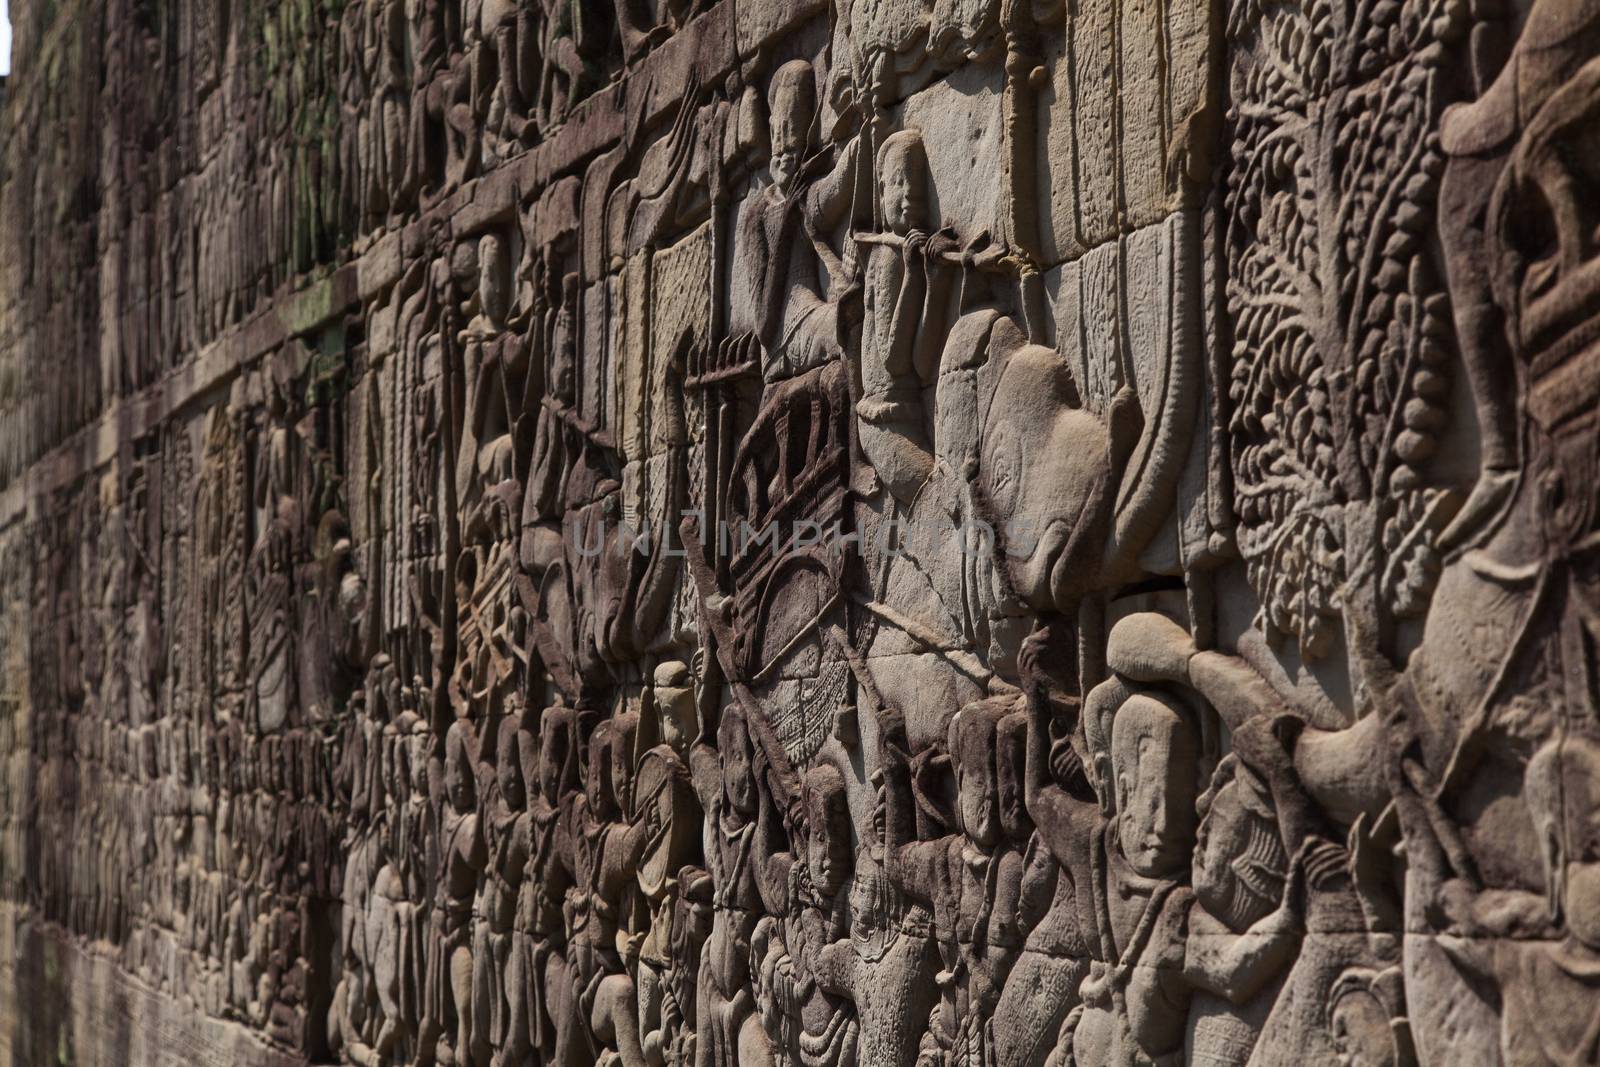 The temple complex of Angkor Watt, Cambodia wall relief depicting ancient wars by kgboxford